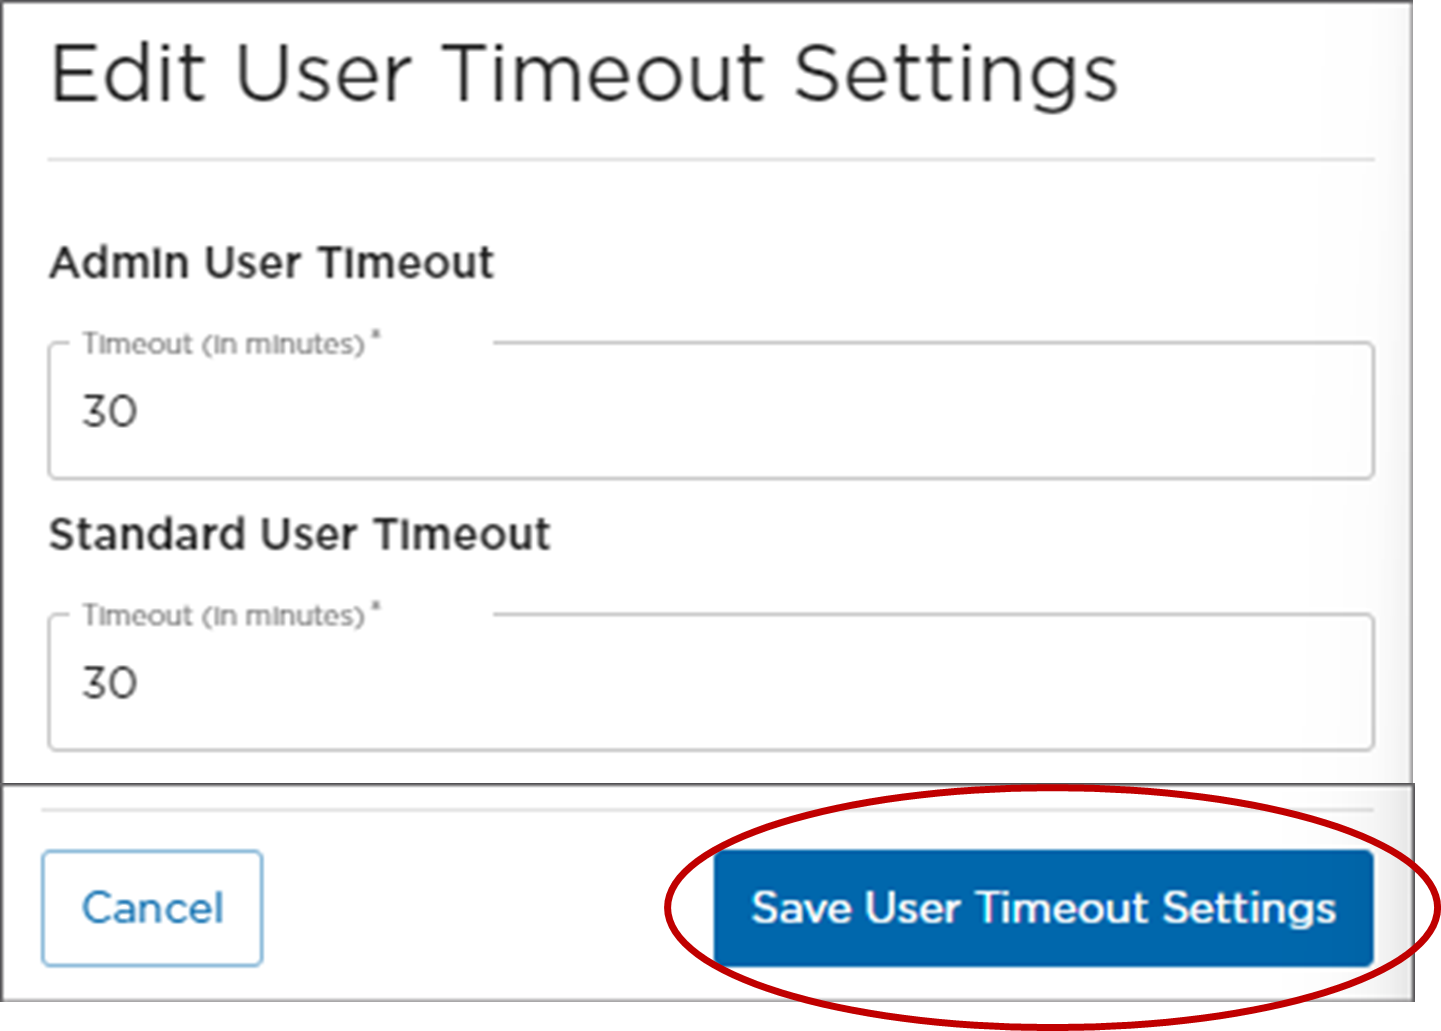 Save User Timeout Settings Button